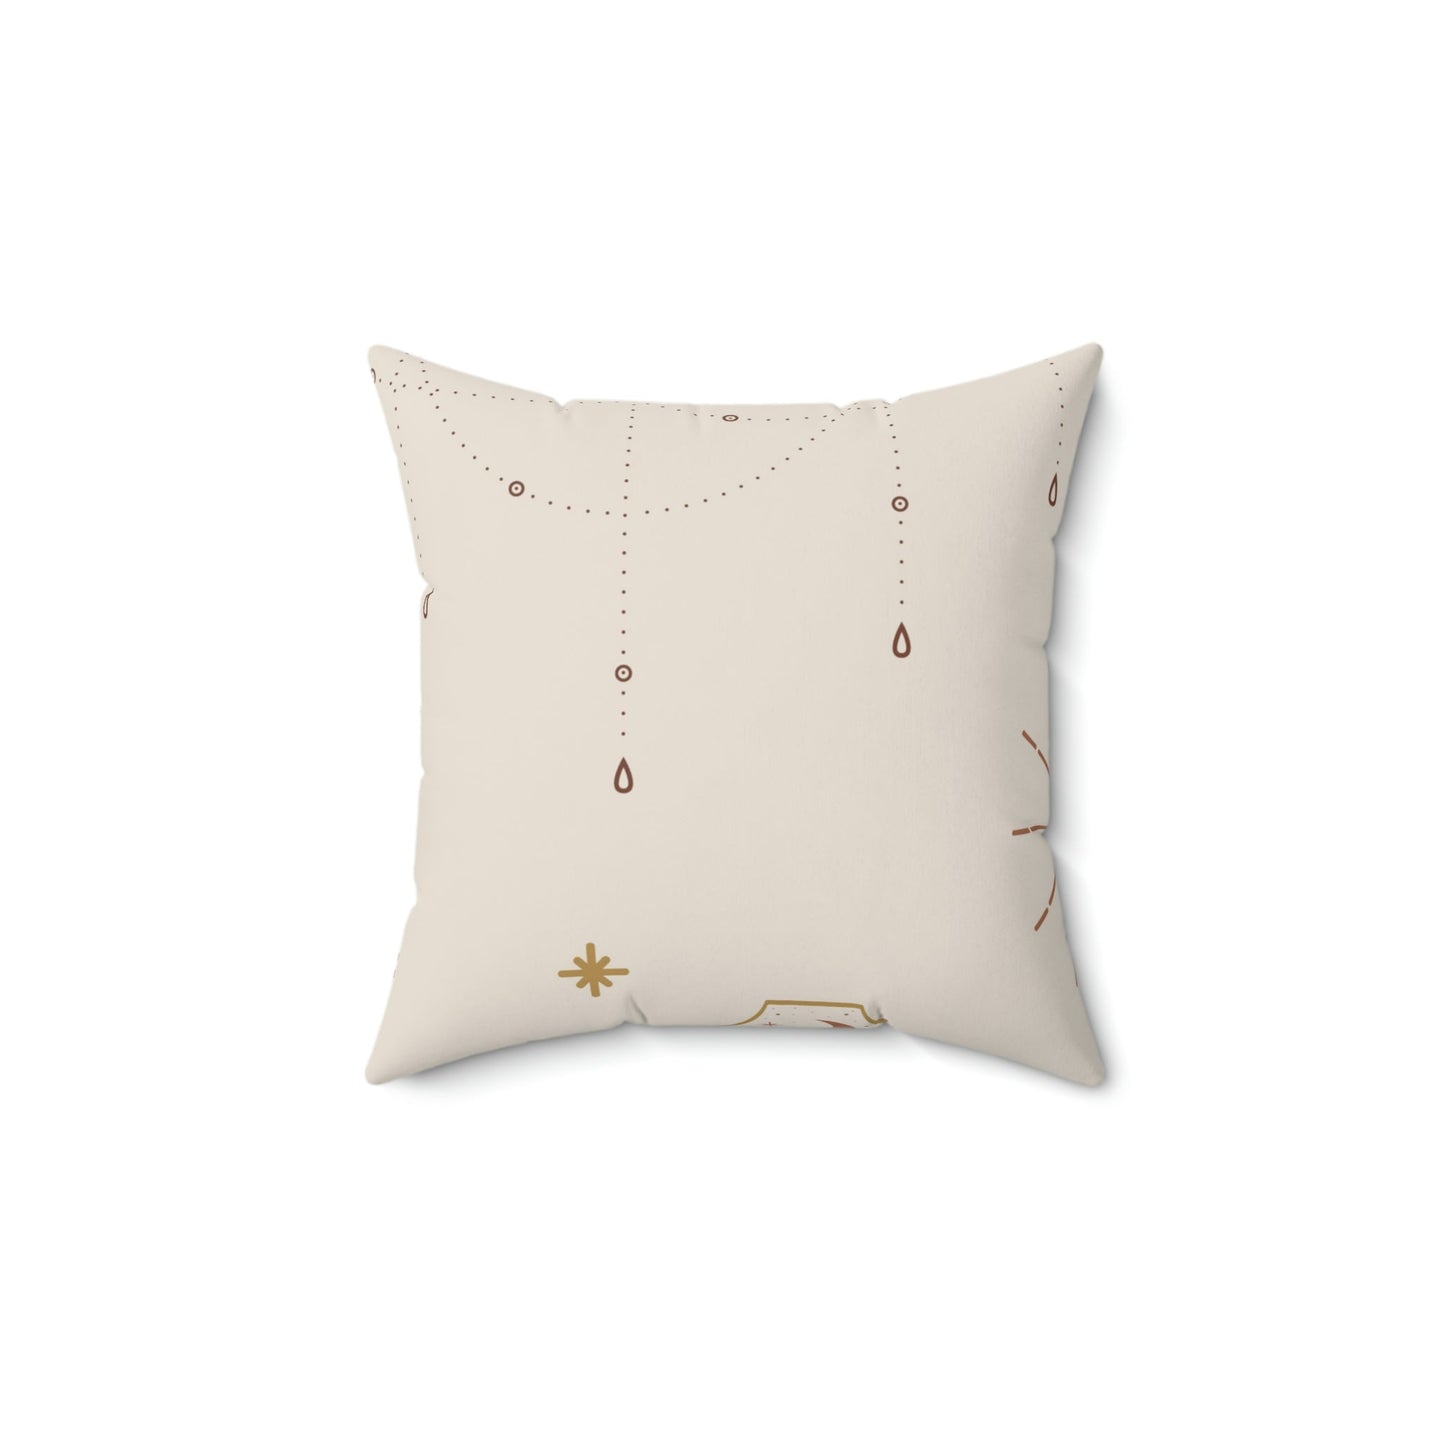 The Lunar Manifest Square Pillow Home Decor Pink Sweetheart